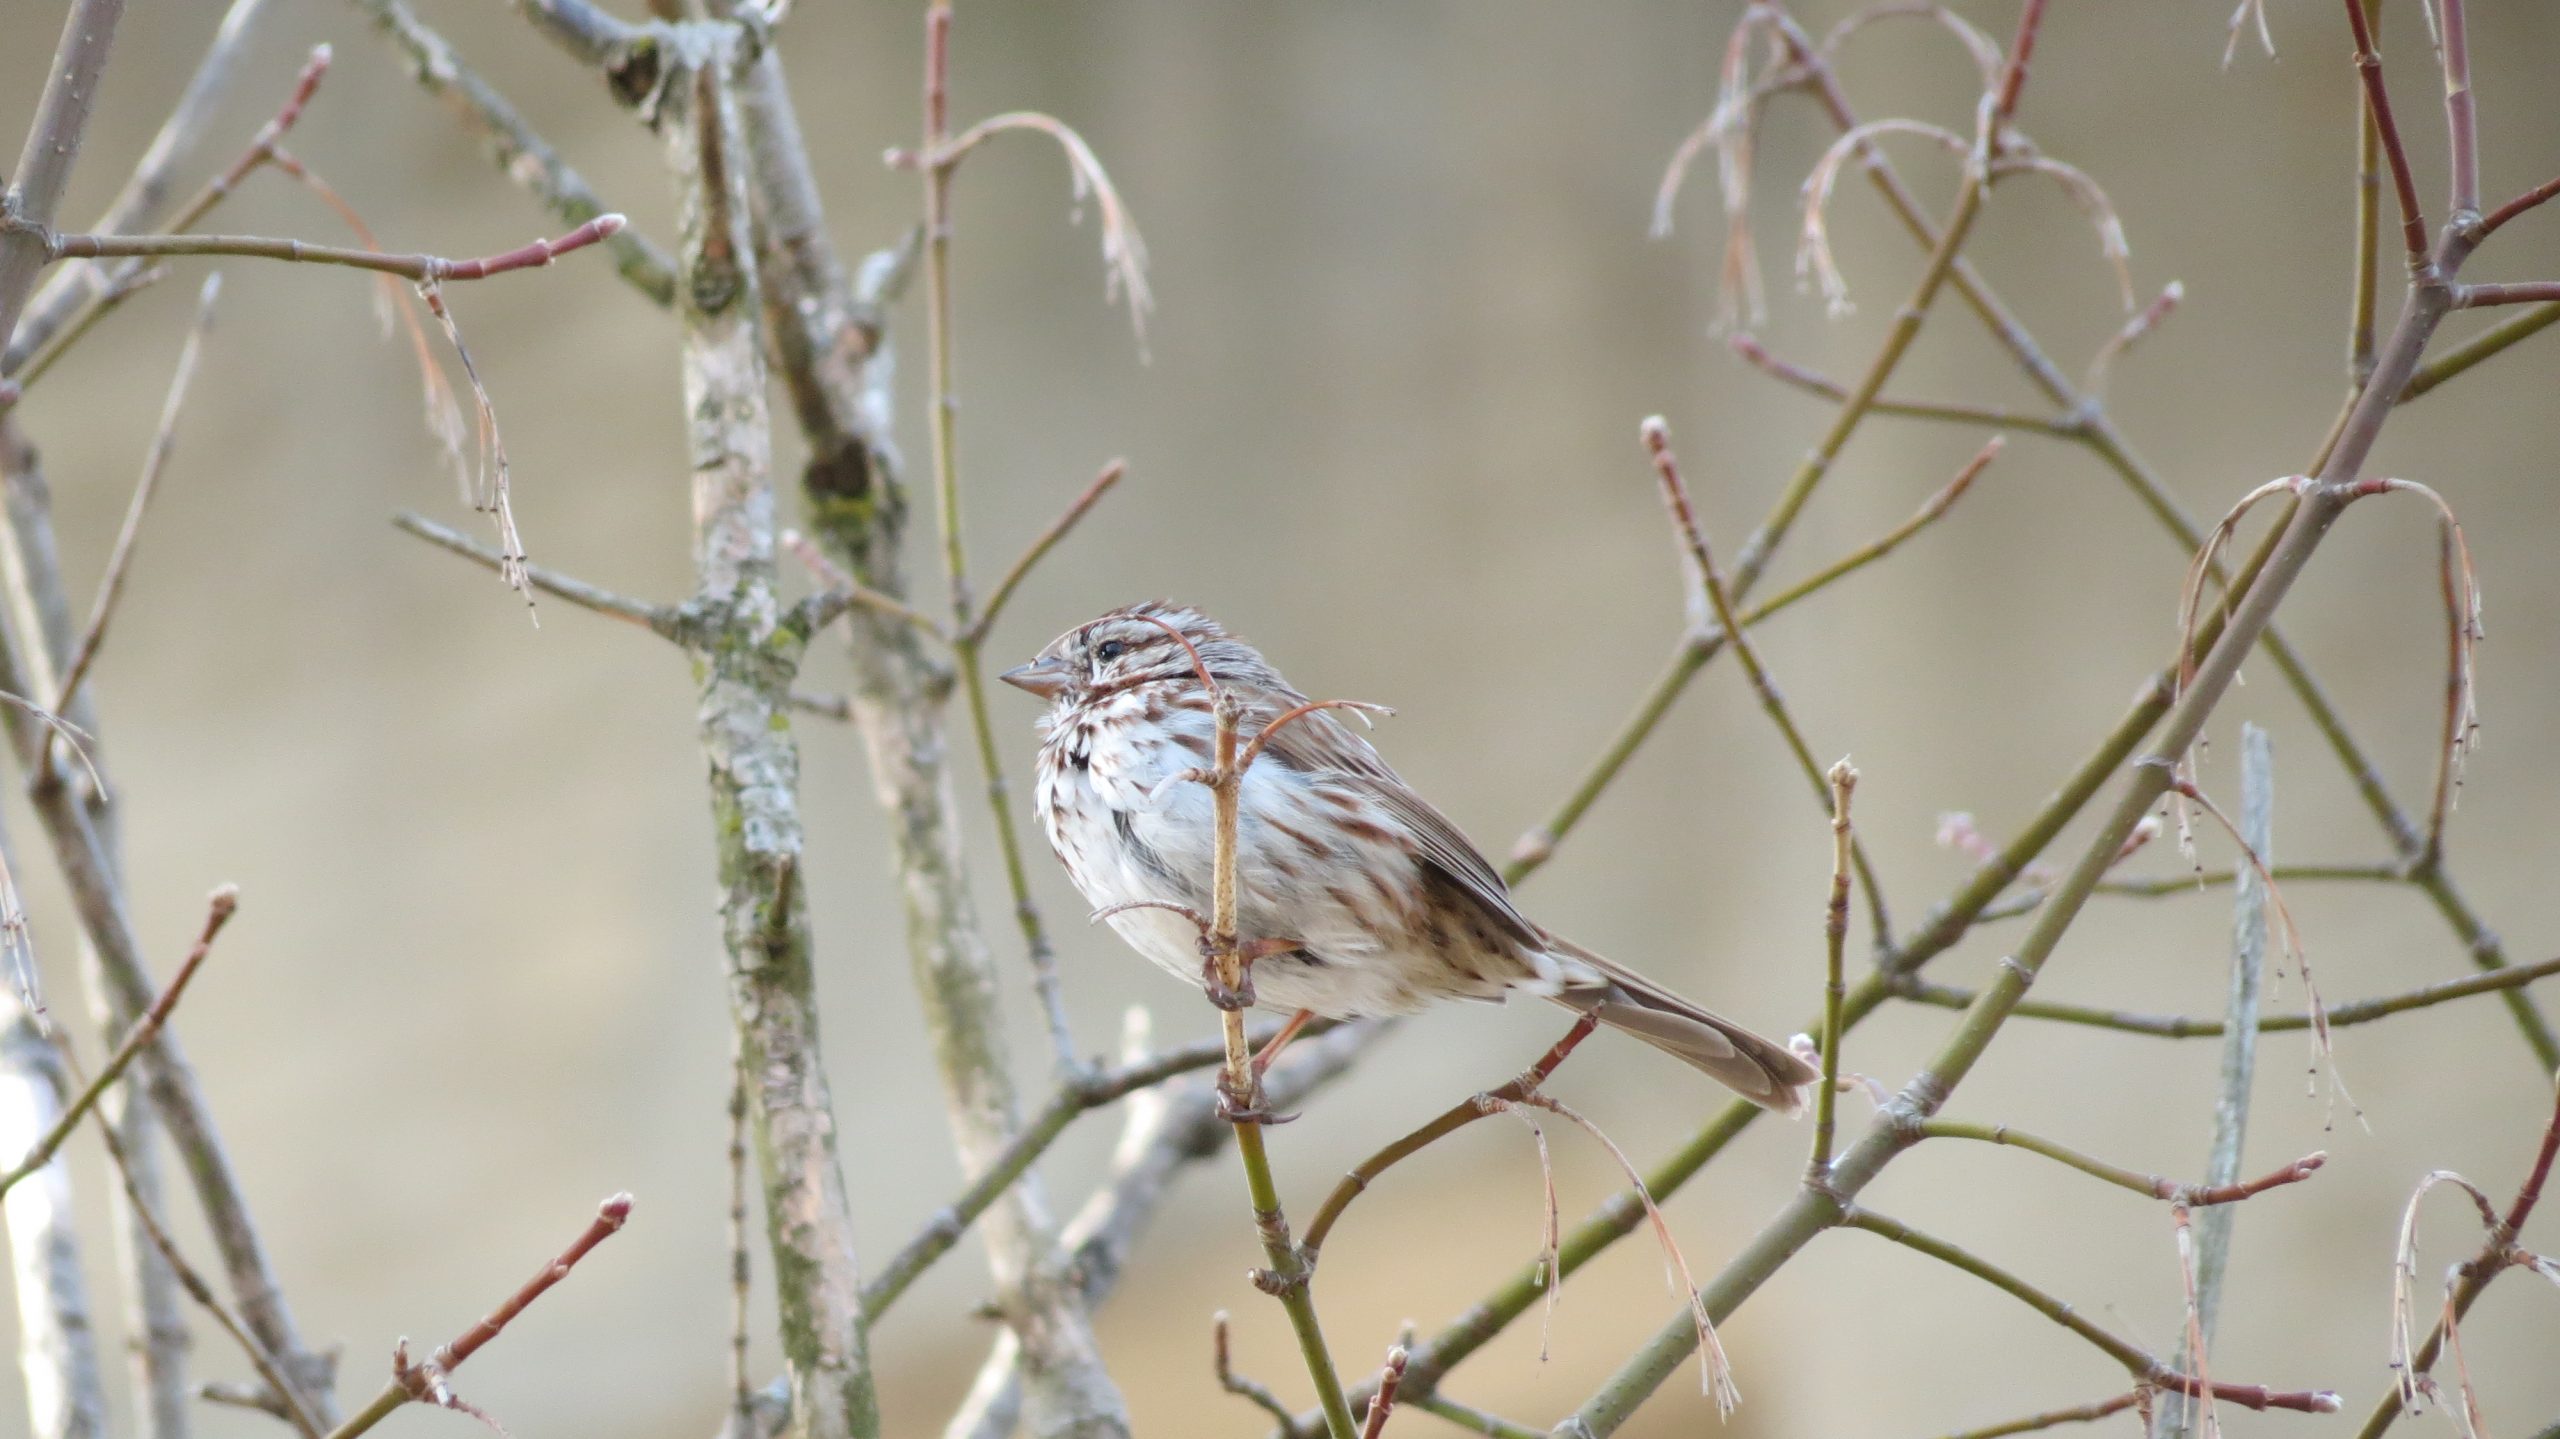 A song sparrow, with rich, russet-and-gray markings and bold streaks down its white chest, in a tree at Taylor Creek Park.